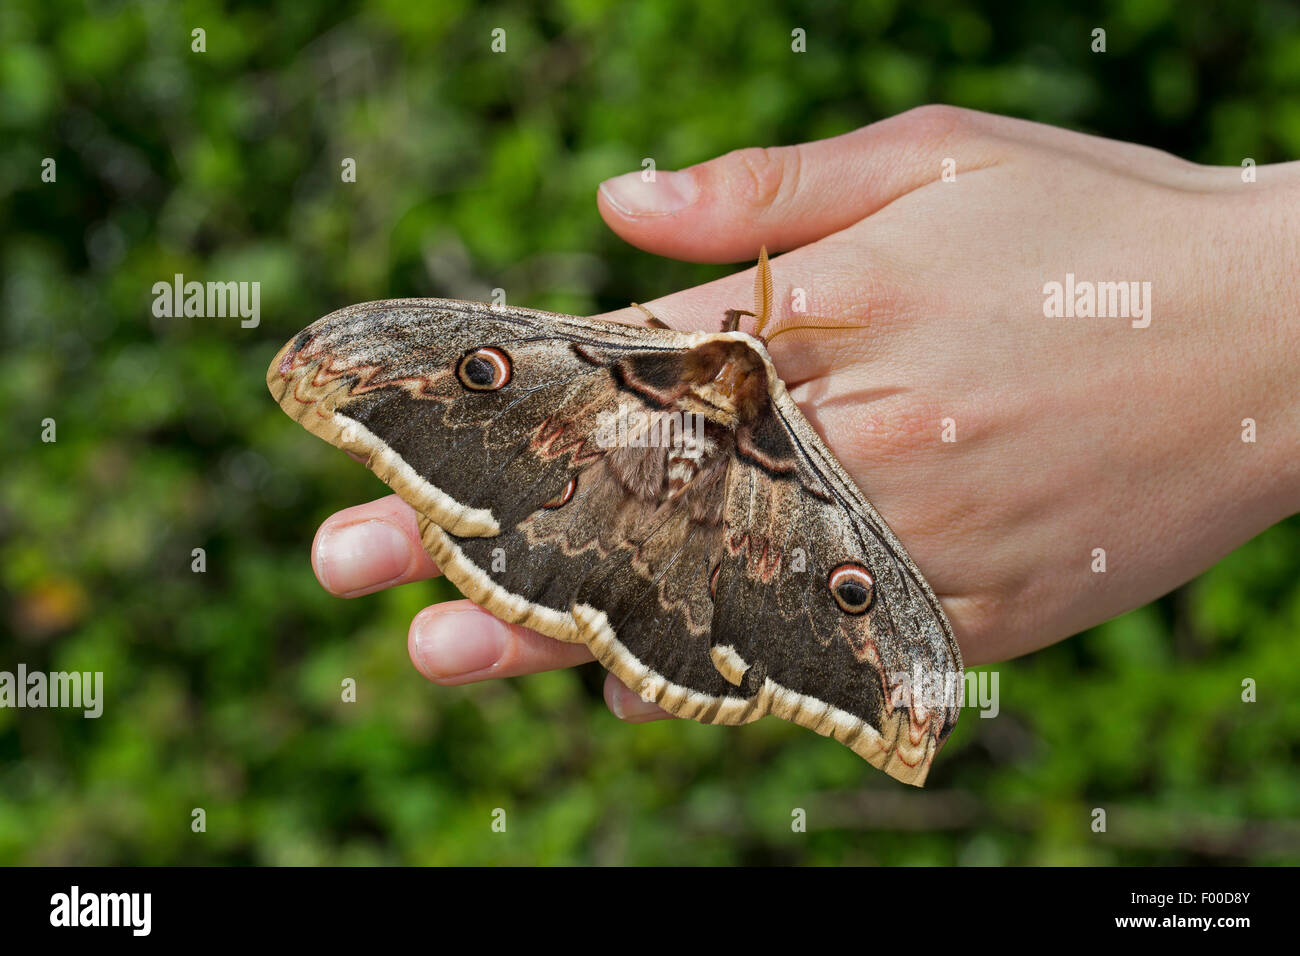 Large Emperor Moth, Giant Peacock Moth, Great Peacock Moth, Giant Emperor Moth, Viennese Emperor (Saturnia pyri), male sitting on a hand, Germany Stock Photo